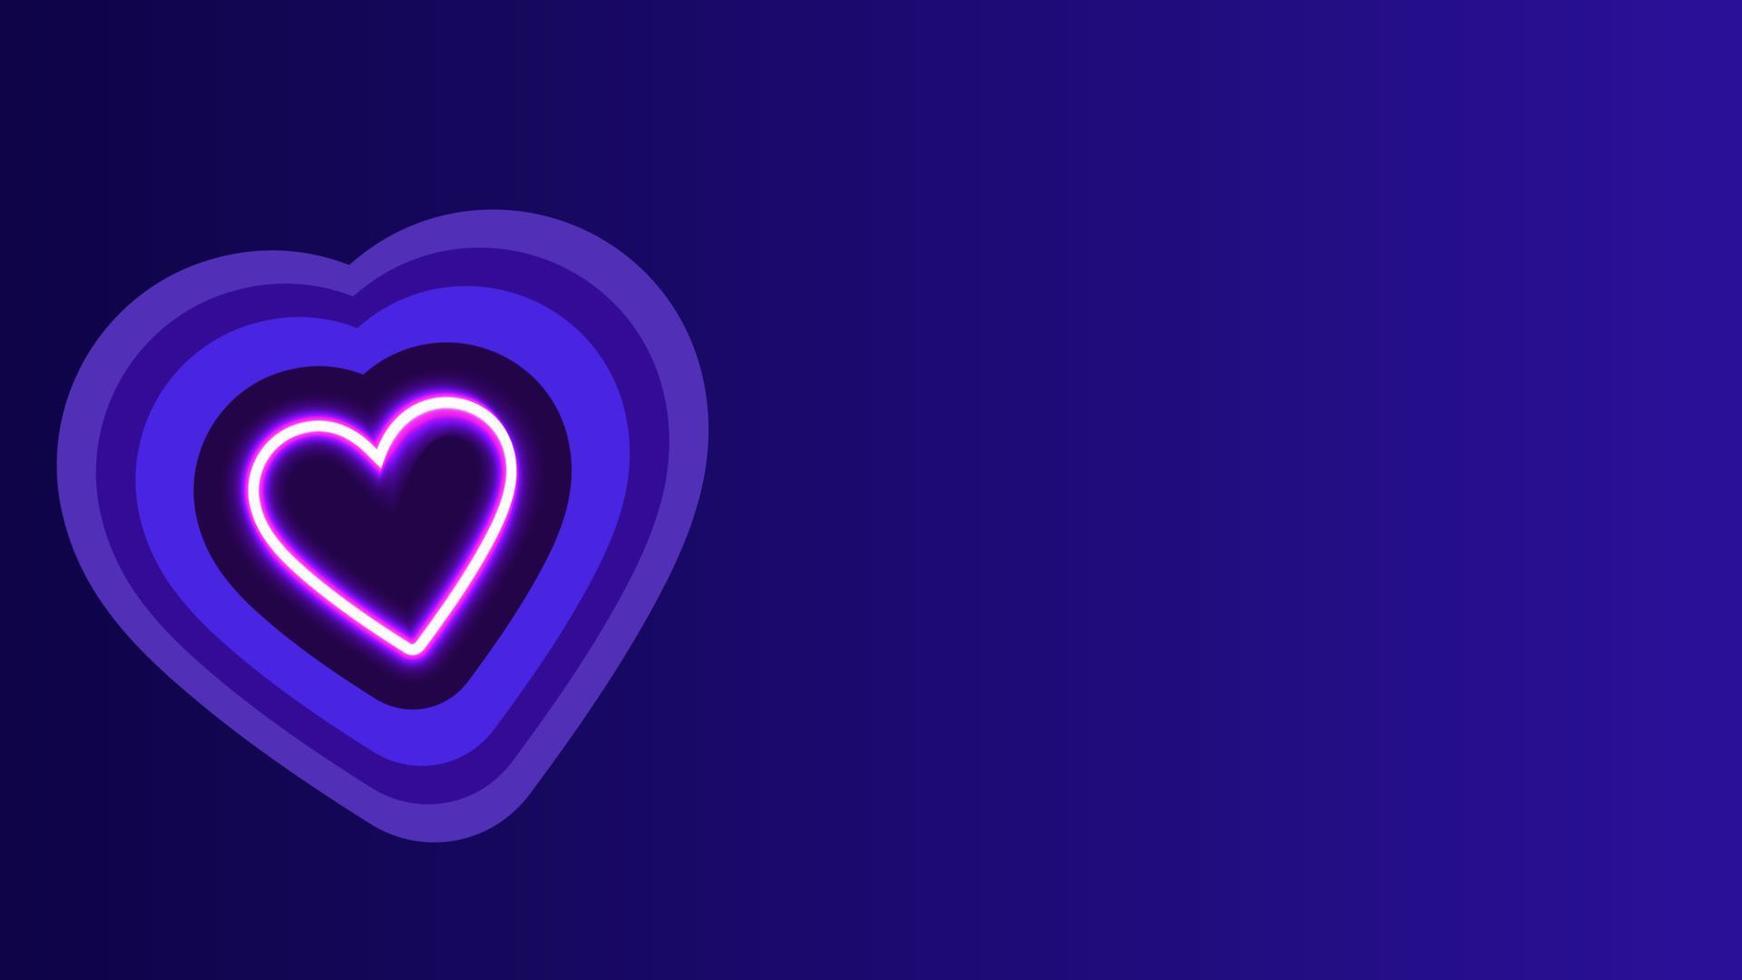 Glowing neon heart with multiple hearts on purple banner with text space vector